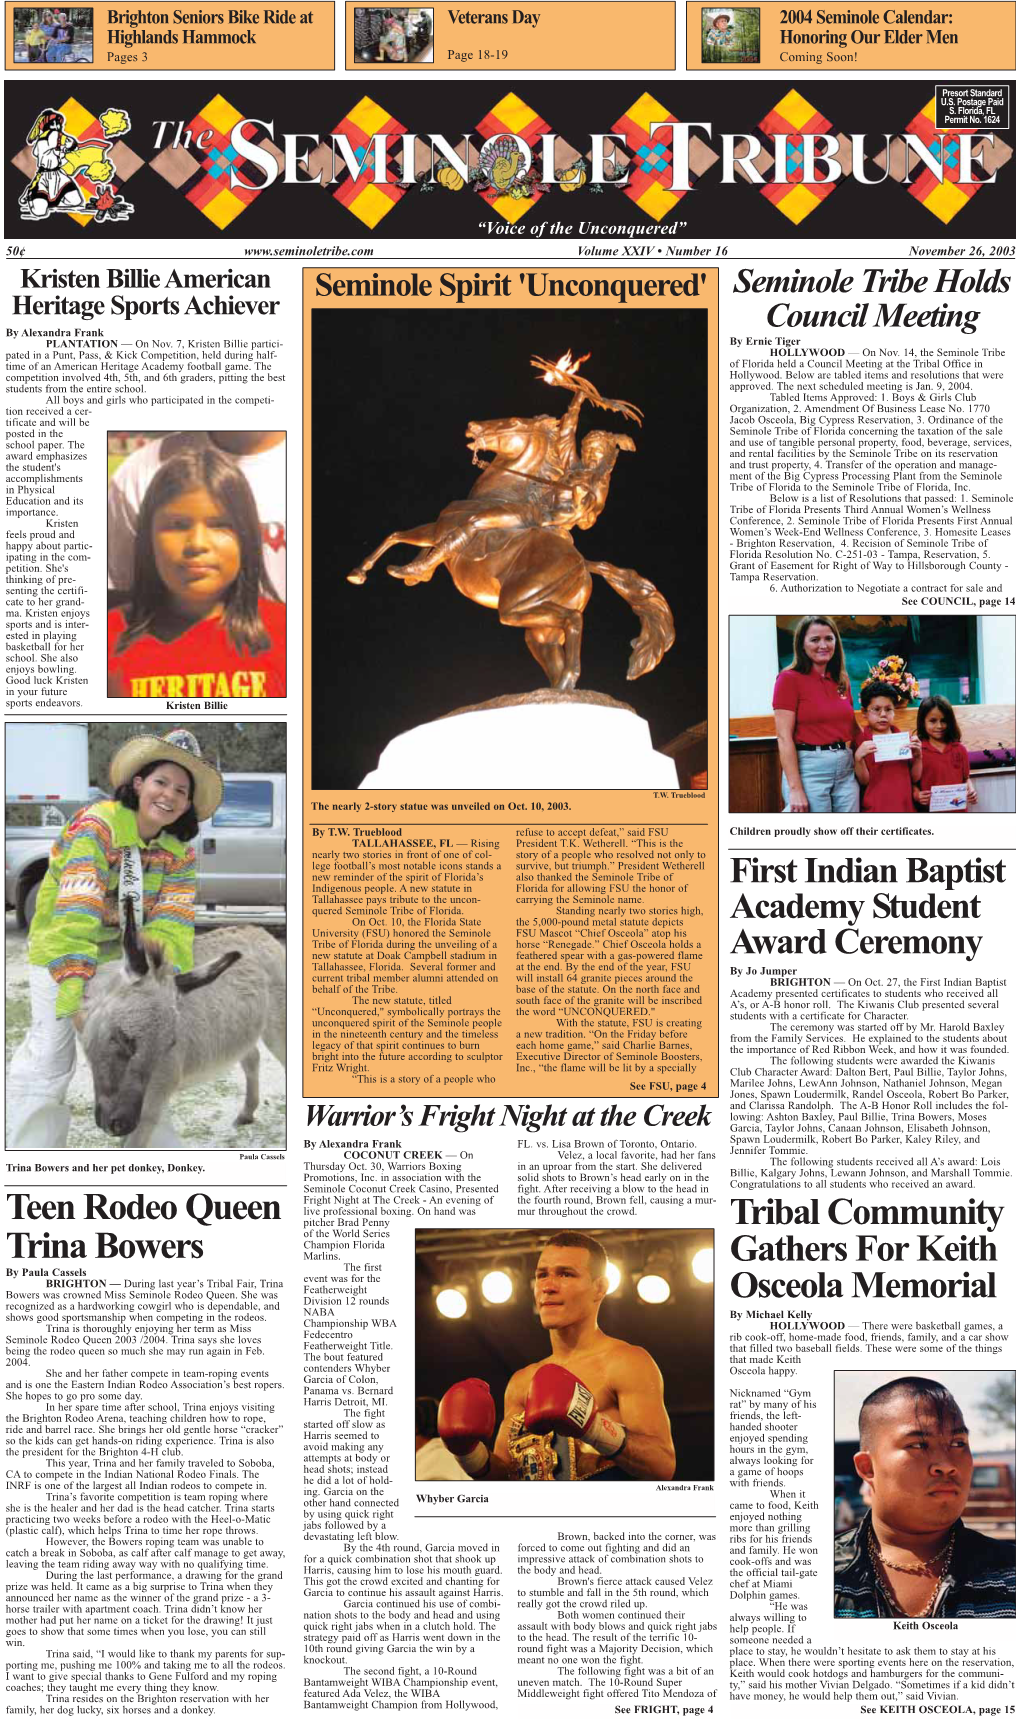 Teen Rodeo Queen Trina Bowers Tribal Community Gathers for Keith Osceola Memorial